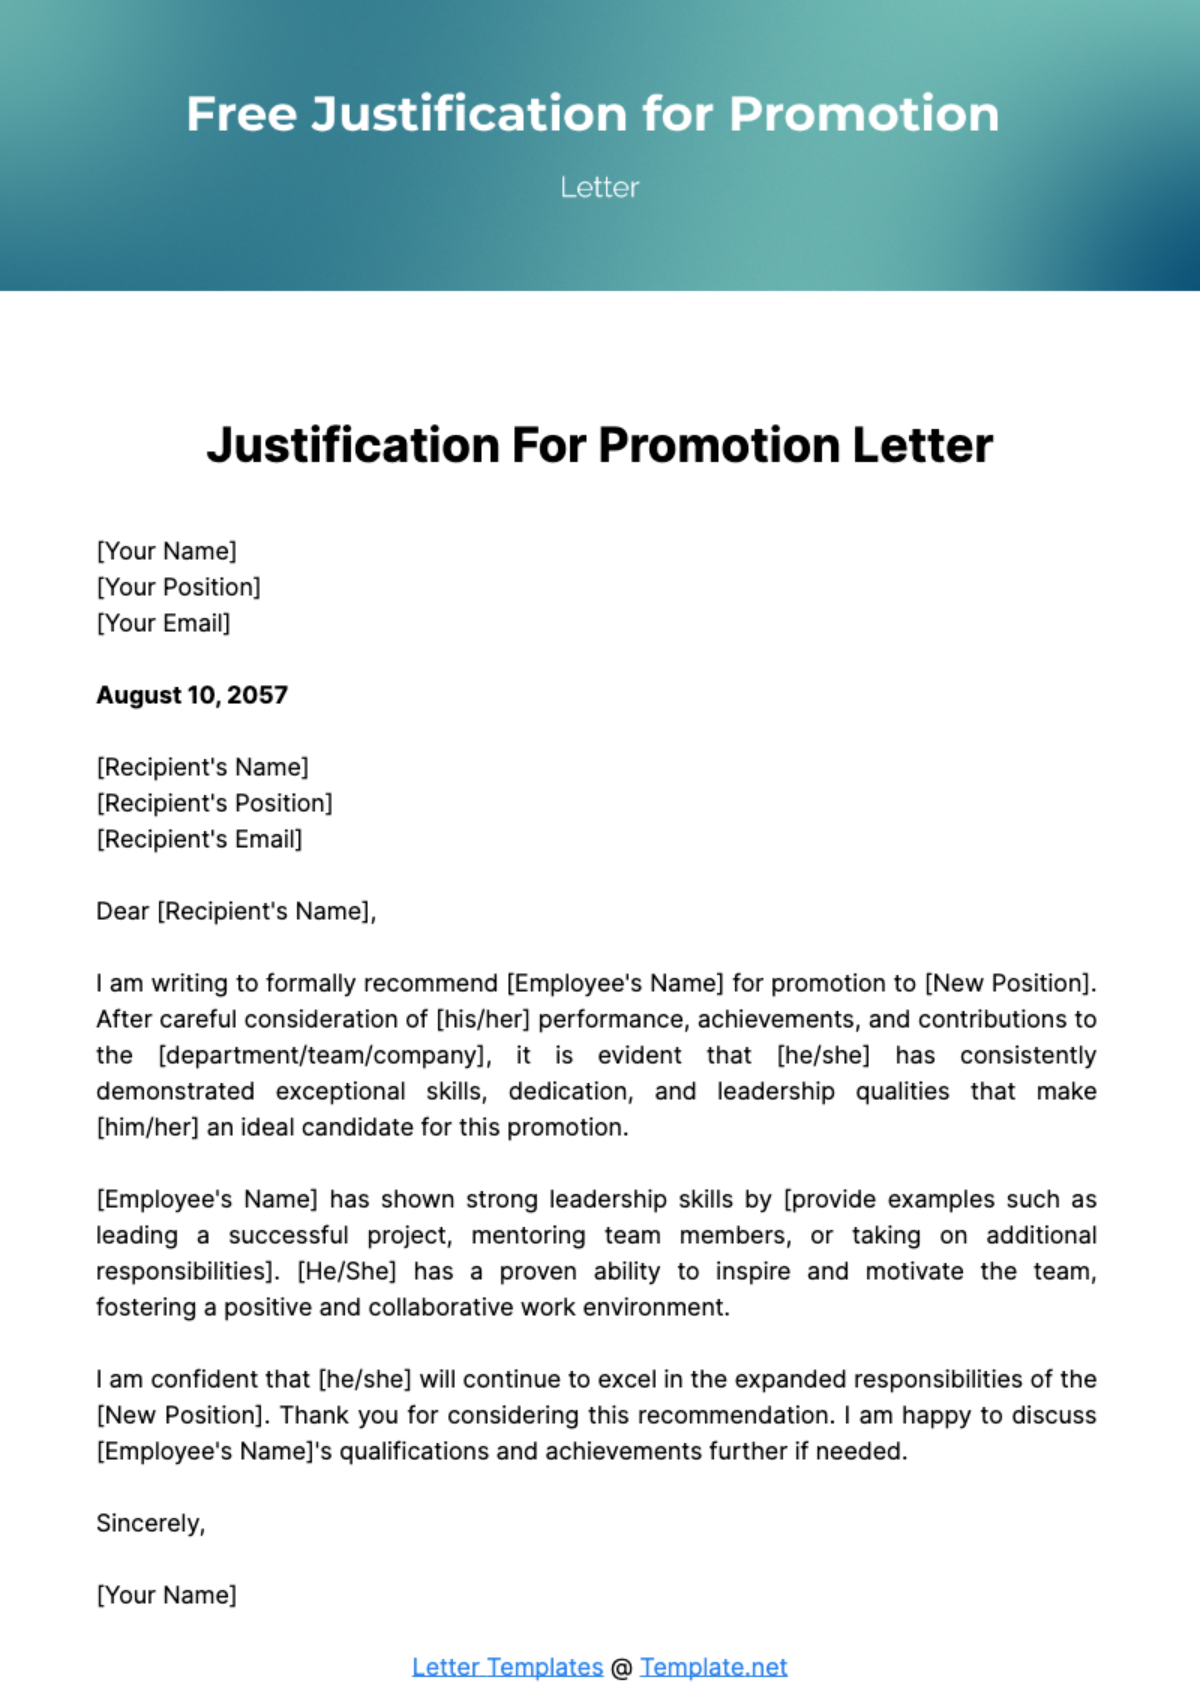 Free Justification for Promotion Letter Template